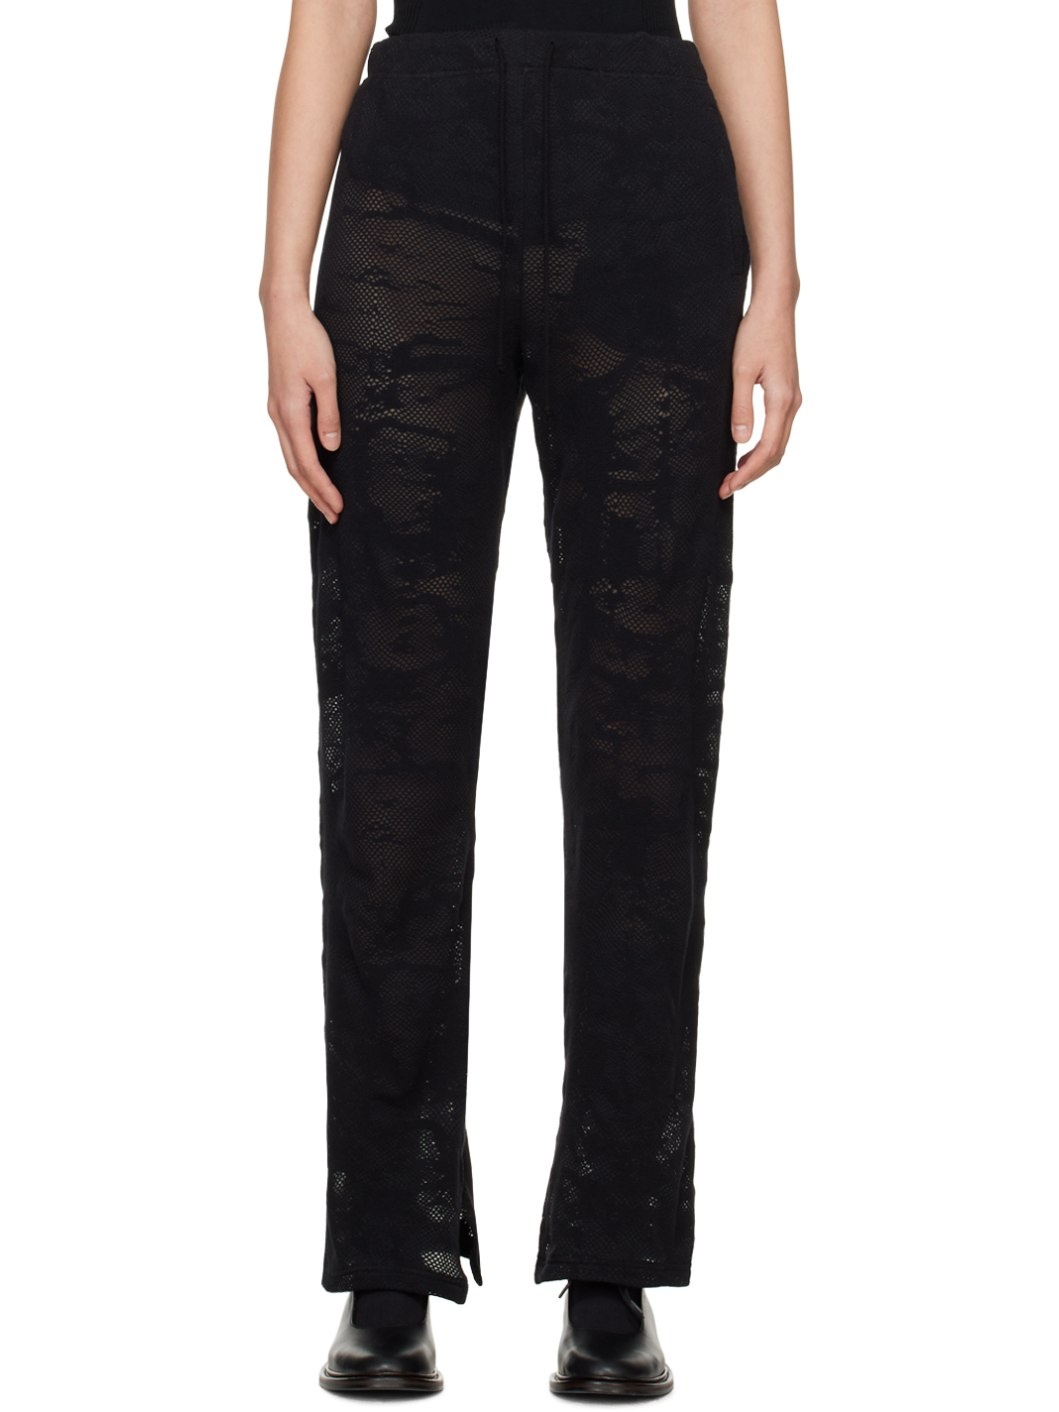 Black Graphic Trousers - 1